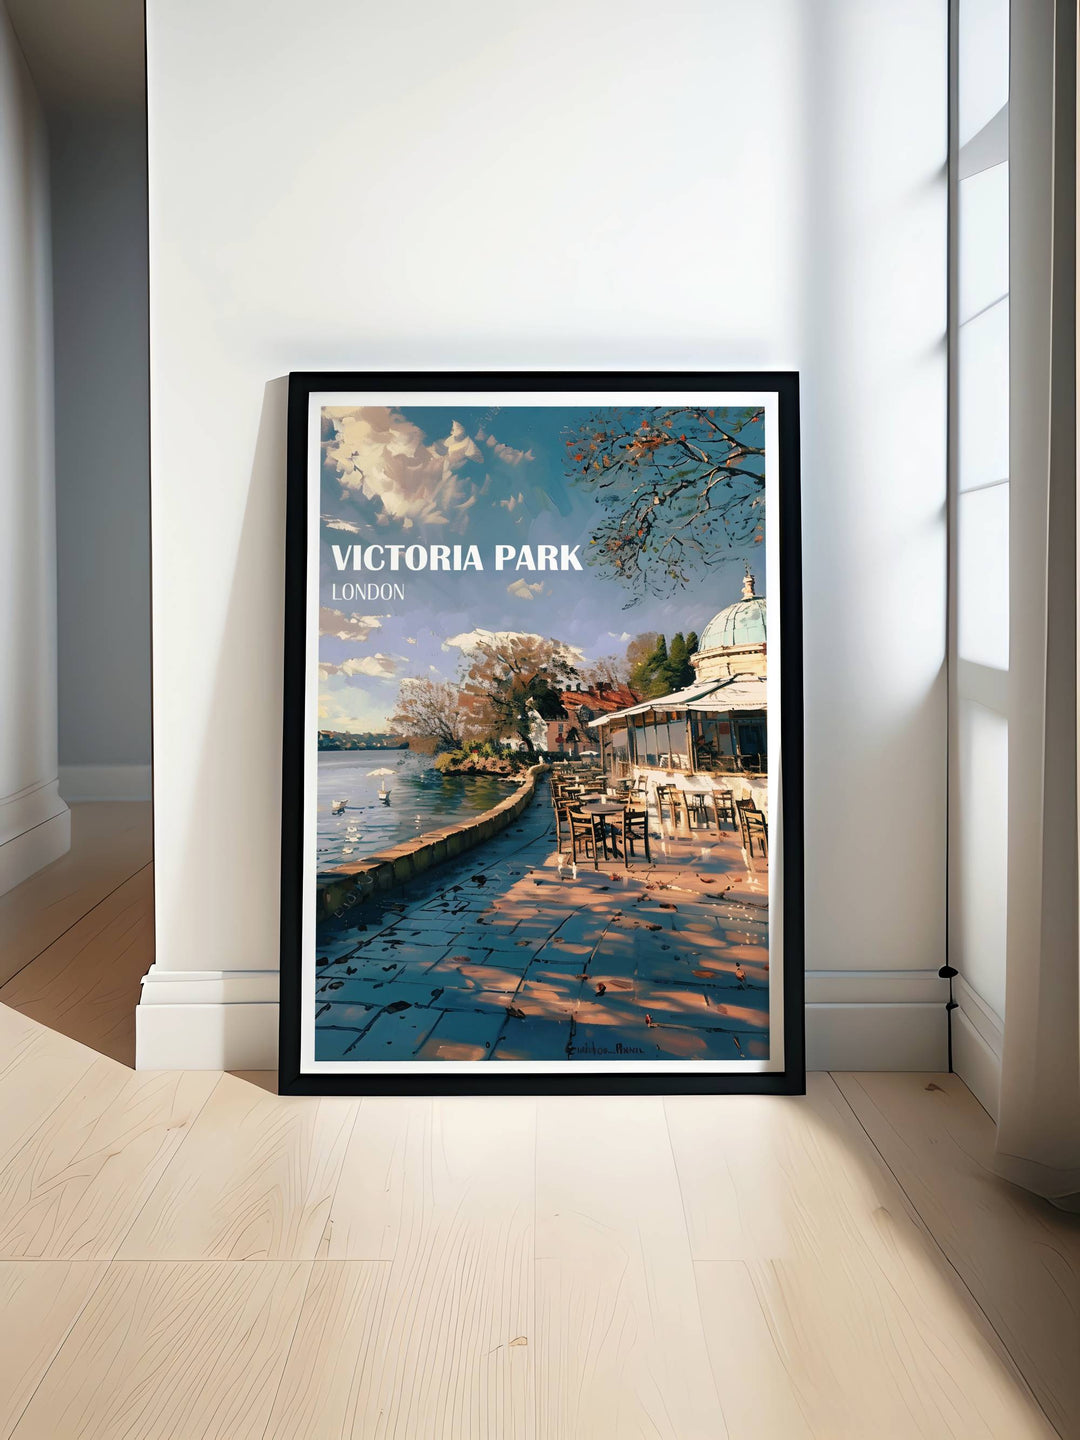 Victoria Park poster featuring The Pavillion Café surrounded by lush greenery and reflecting the serene lake waters, perfect for East London home decor.